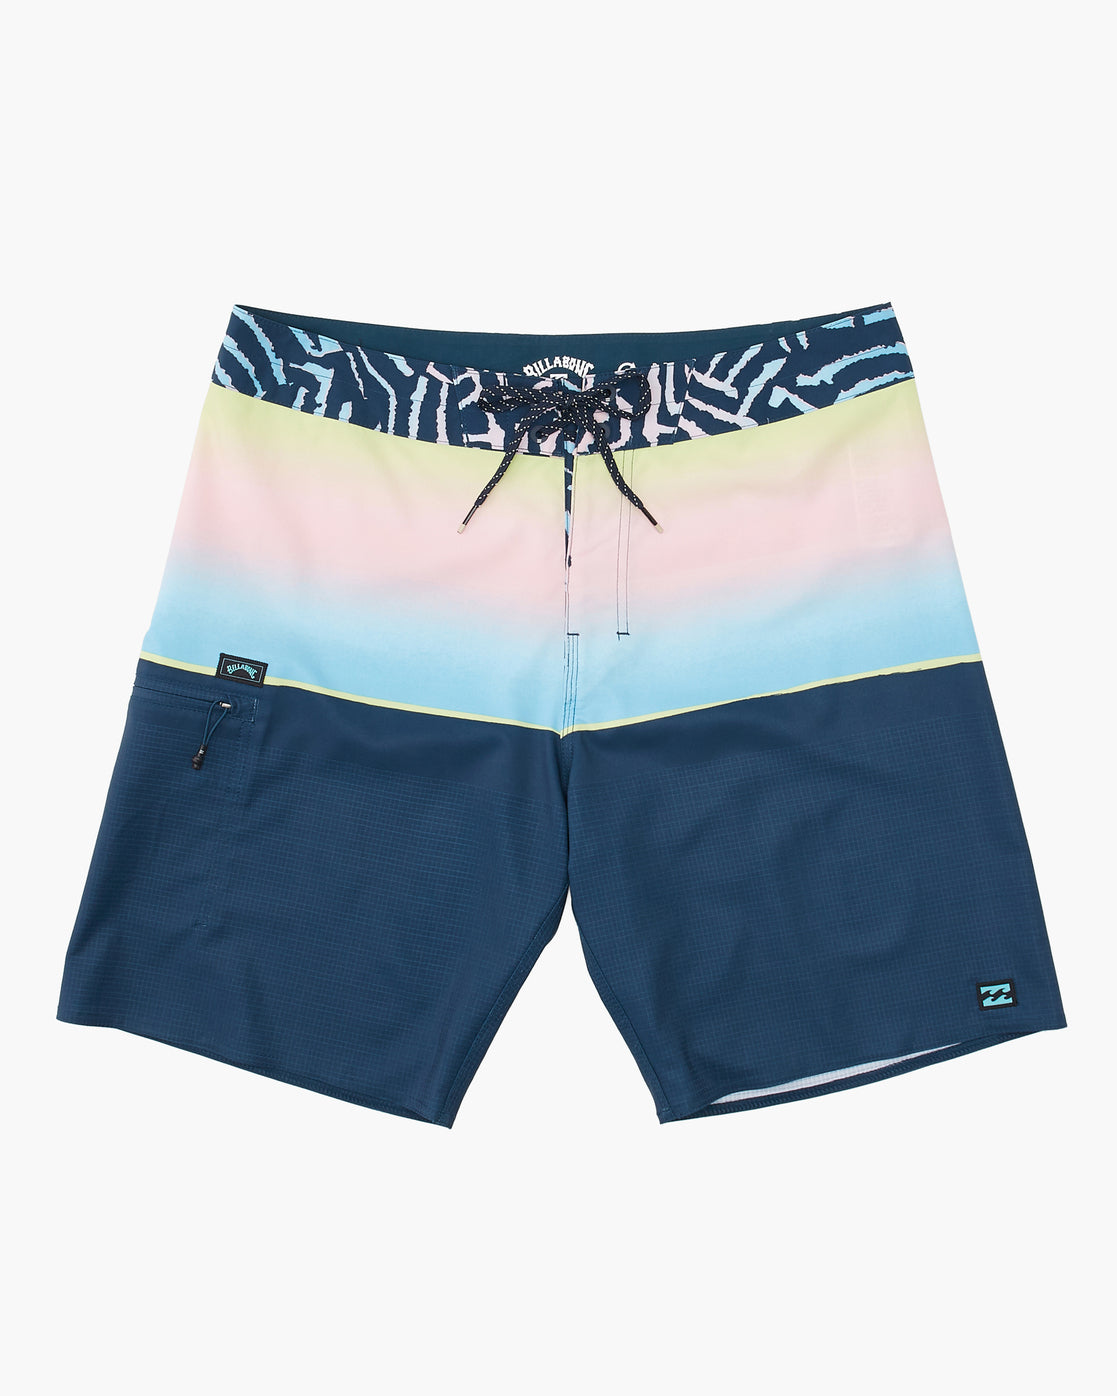 Fifty50 Airlite Boardshorts 19"